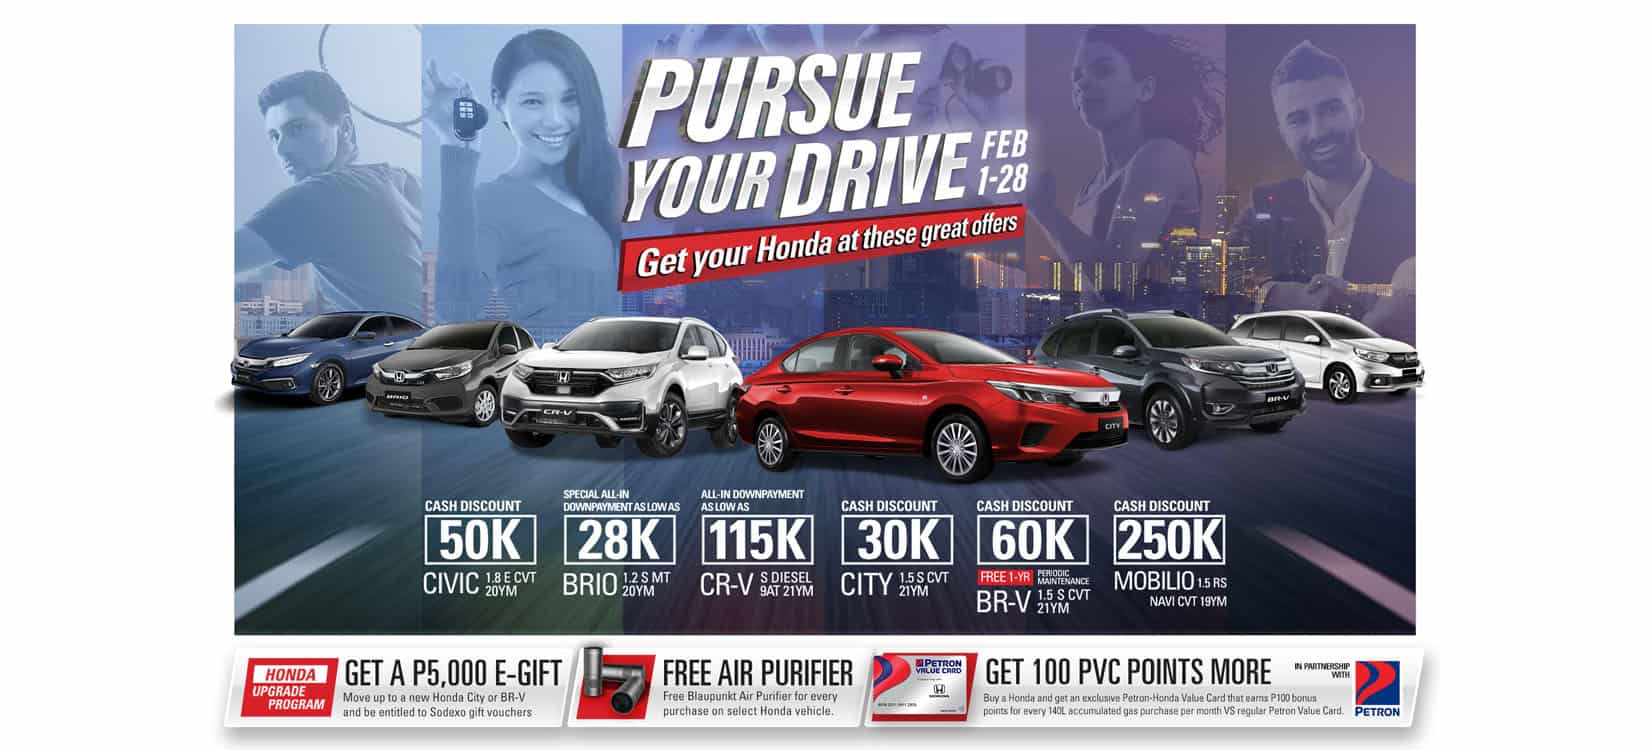 Honda Cars Philippines Up To 250k Discount For Mobilio And Other Offers From Honda This February